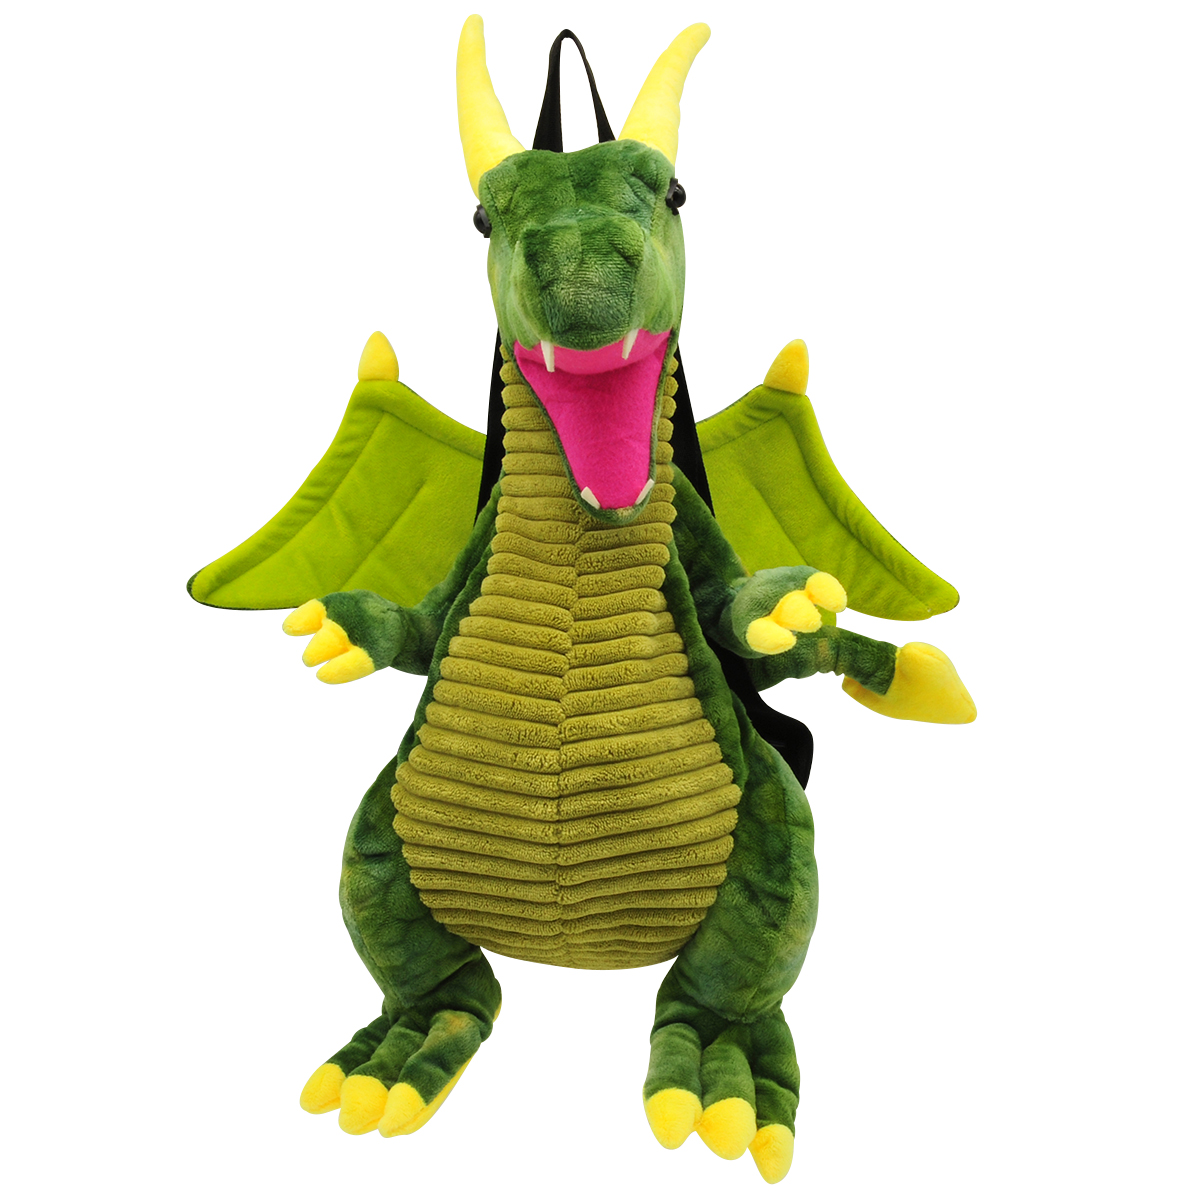 Treasure Cove Plush Pterodactyl Dragon Backpack 7176C Kids Stuffed 20-Inch Dragon Day Pack with Hidden Pocket for Small Item Tre